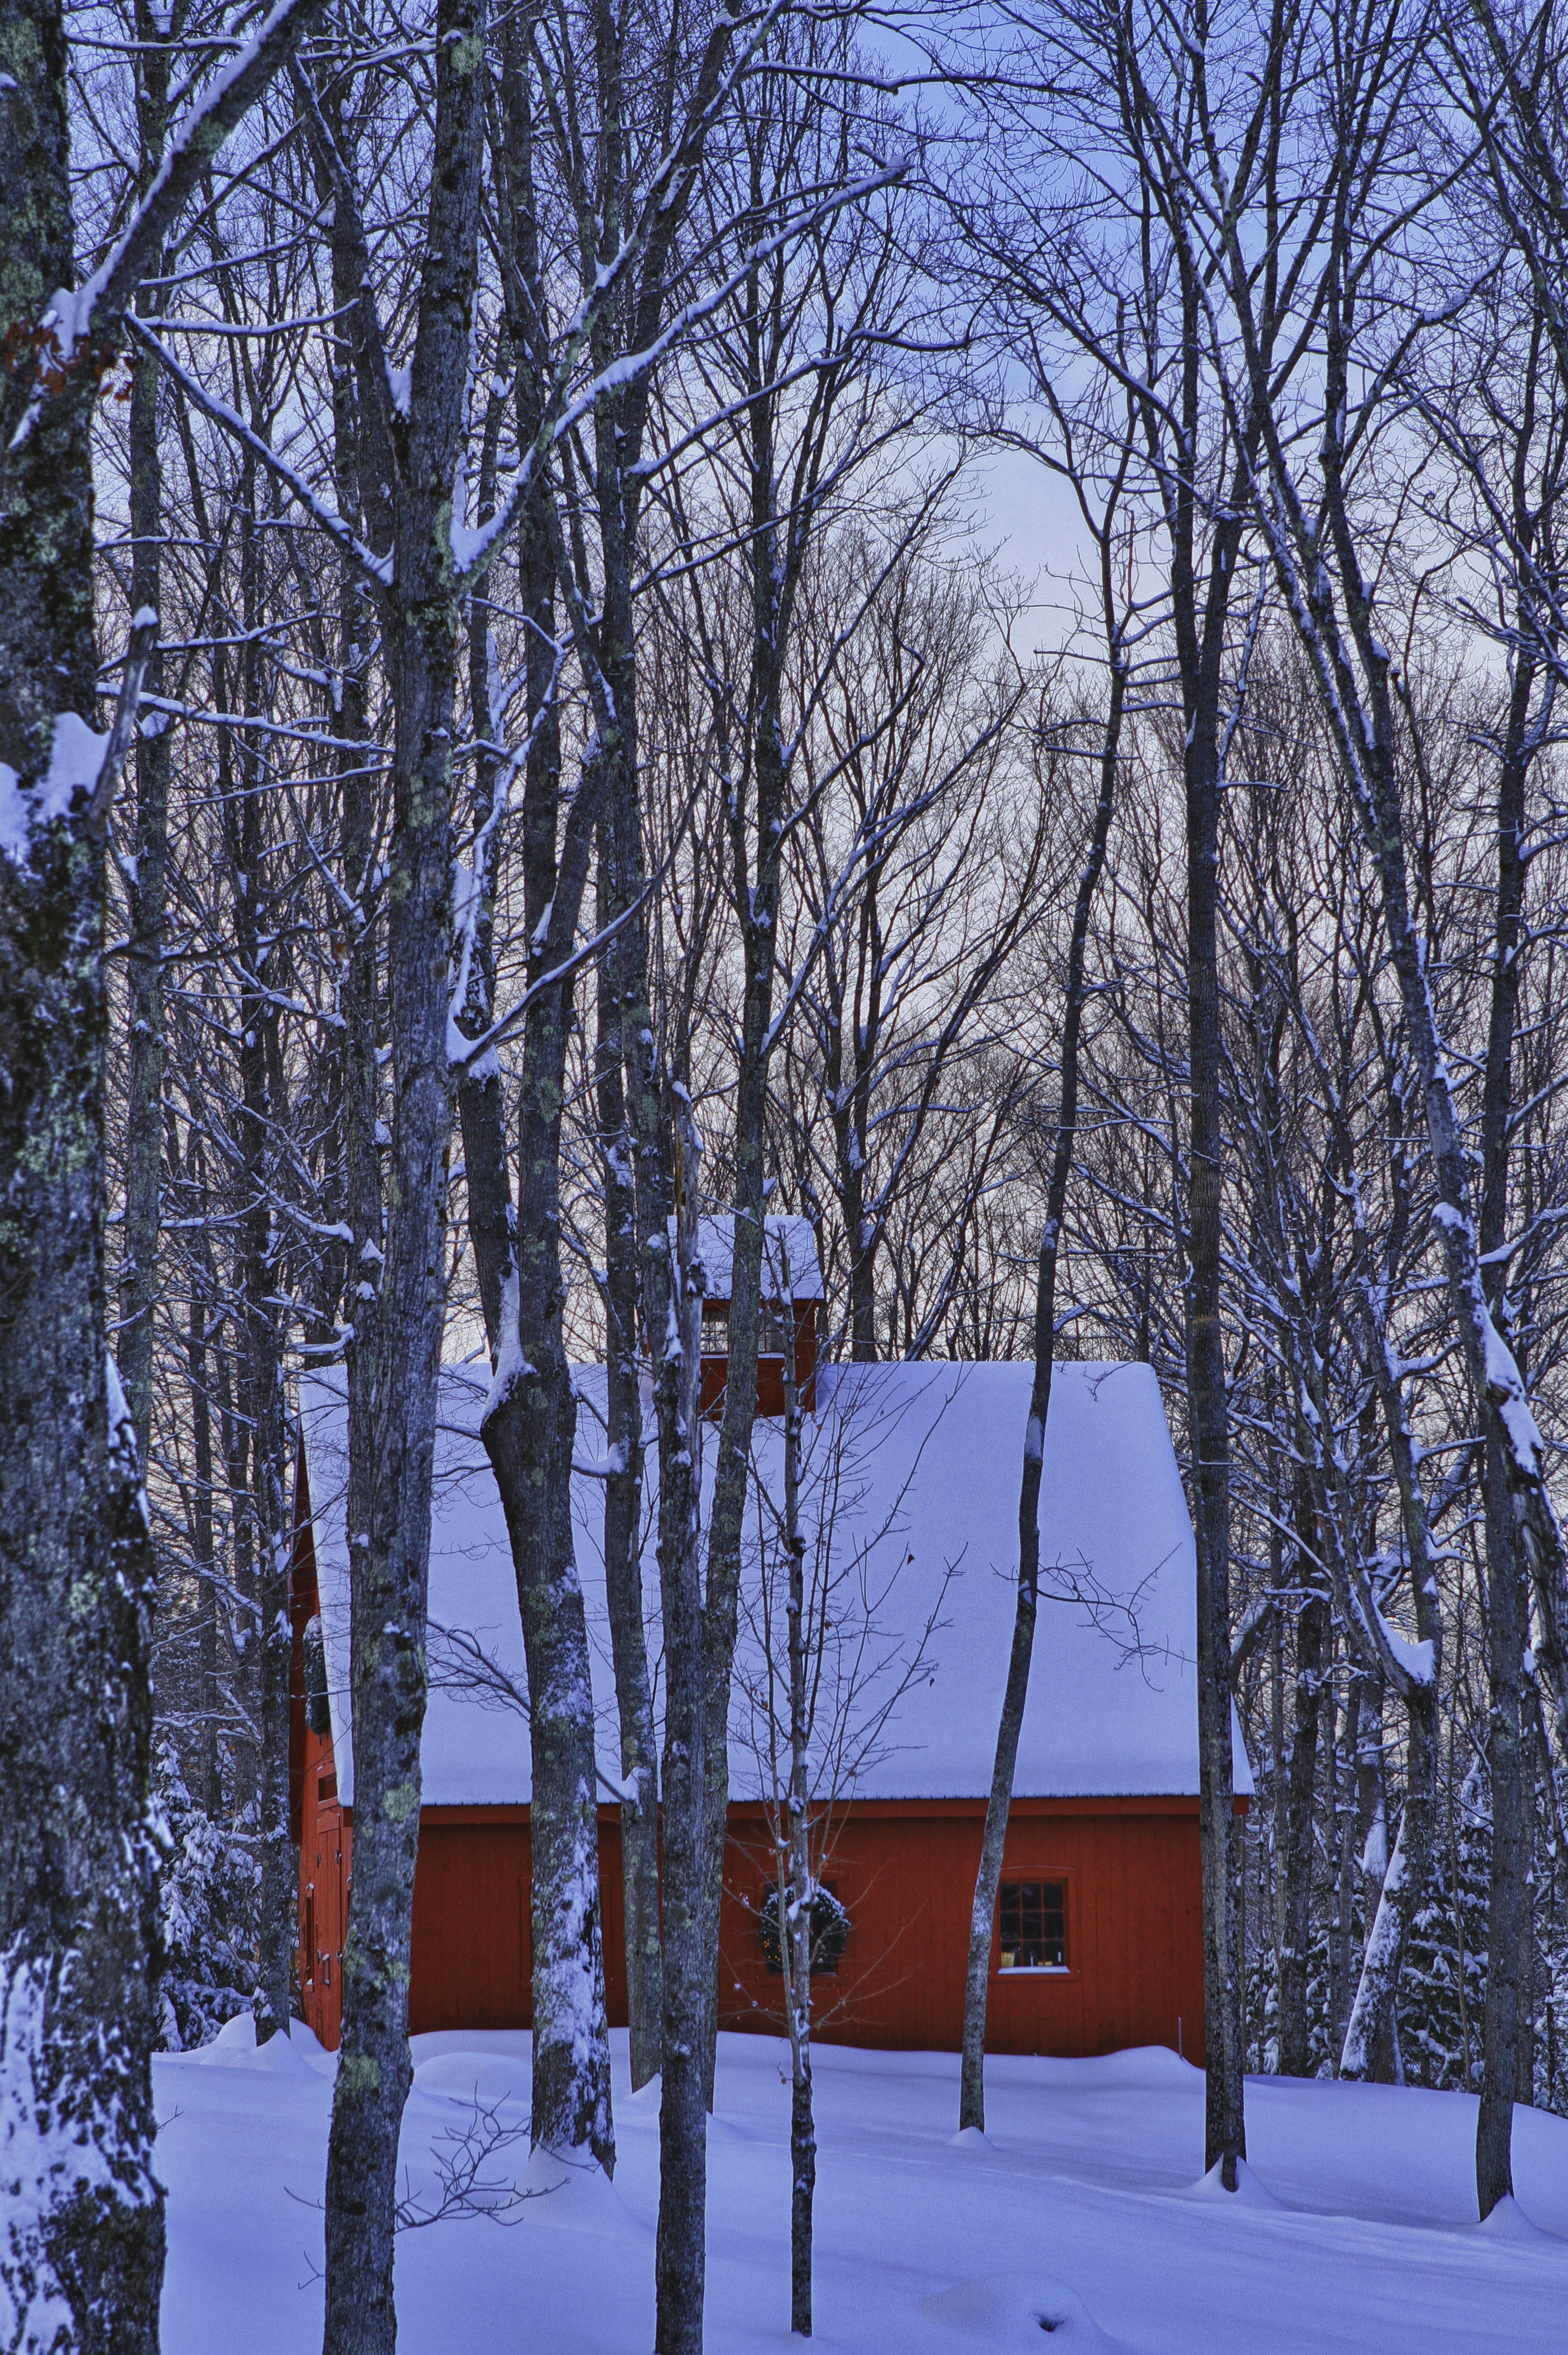 Red House in the Snow